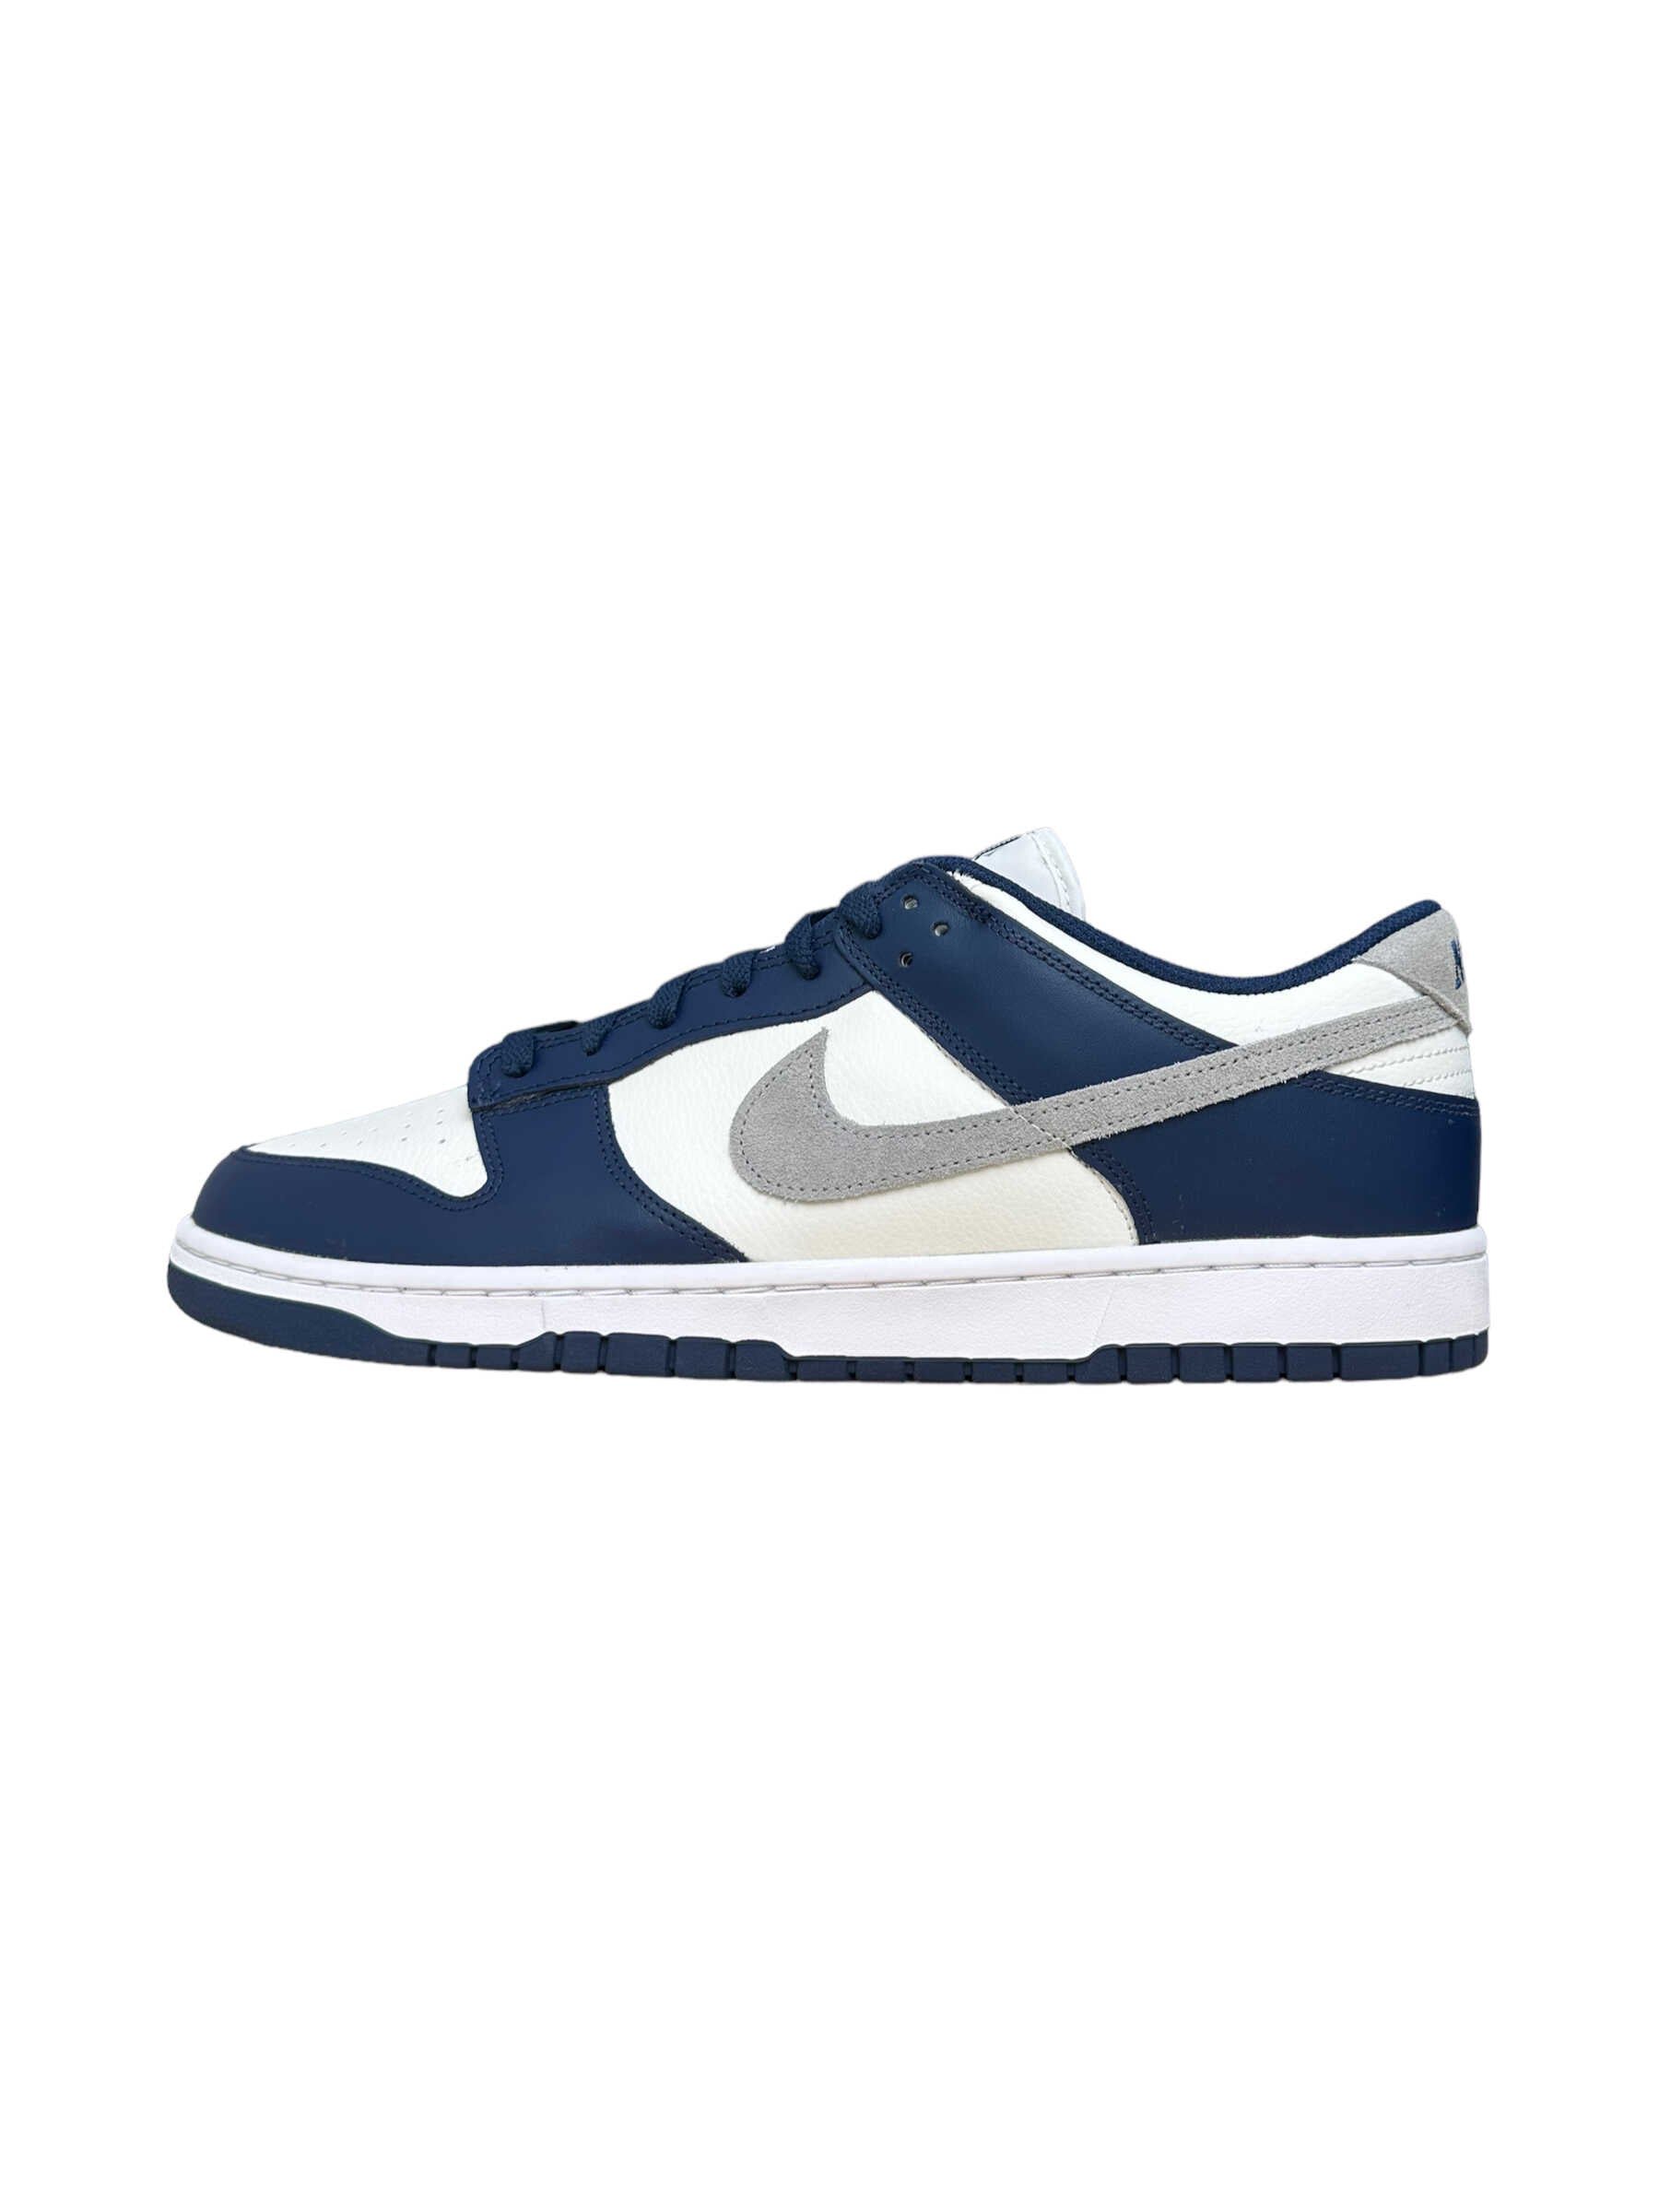 Nike Dunk Low Midnight Navy Smoke Grey Sneakers - Genuine Design Luxury Consignment for Men. New & Pre-Owned Clothing, Shoes, & Accessories. Calgary, Canada